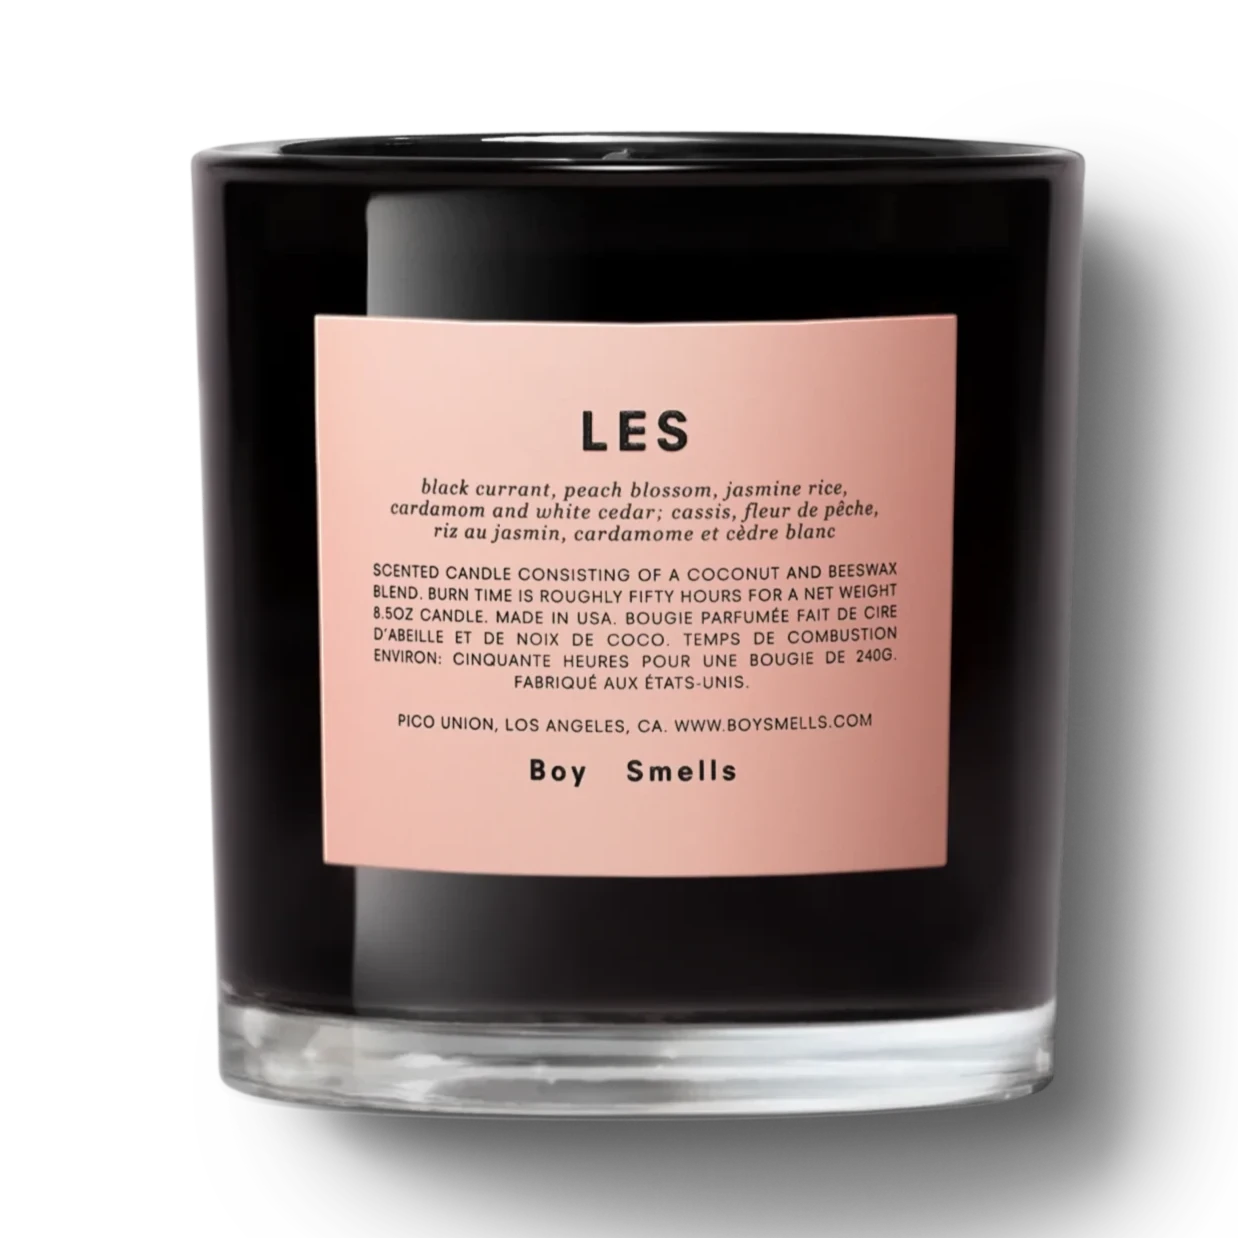 glossy black glass candle with pink label on it. pink label has black text